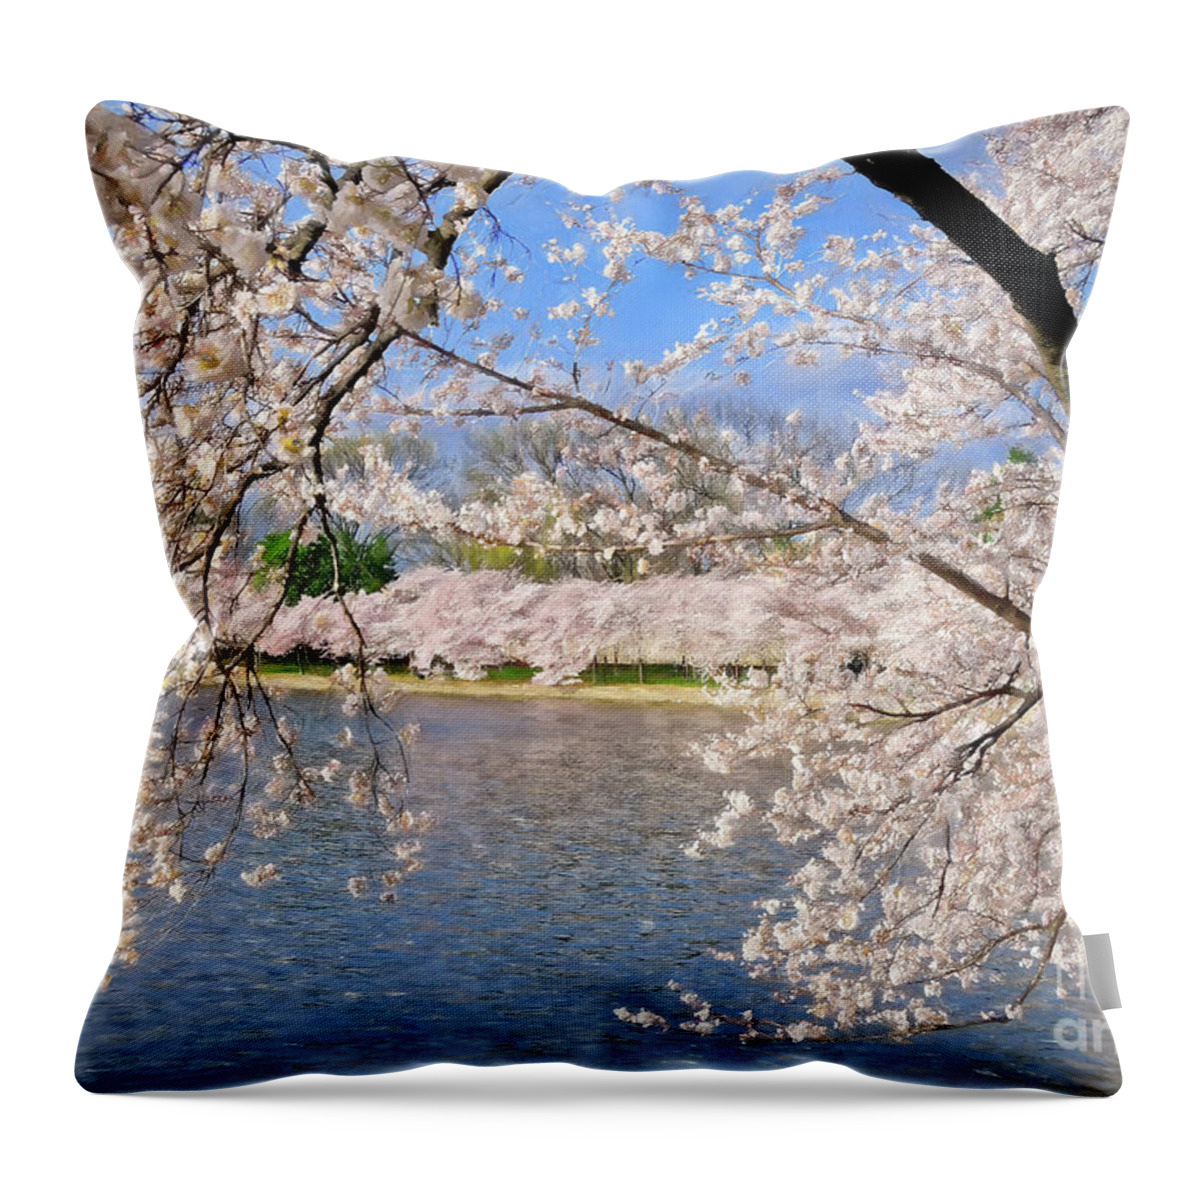 Cherry Blossom Festival Throw Pillow featuring the photograph At Peak Bloom by Lois Bryan